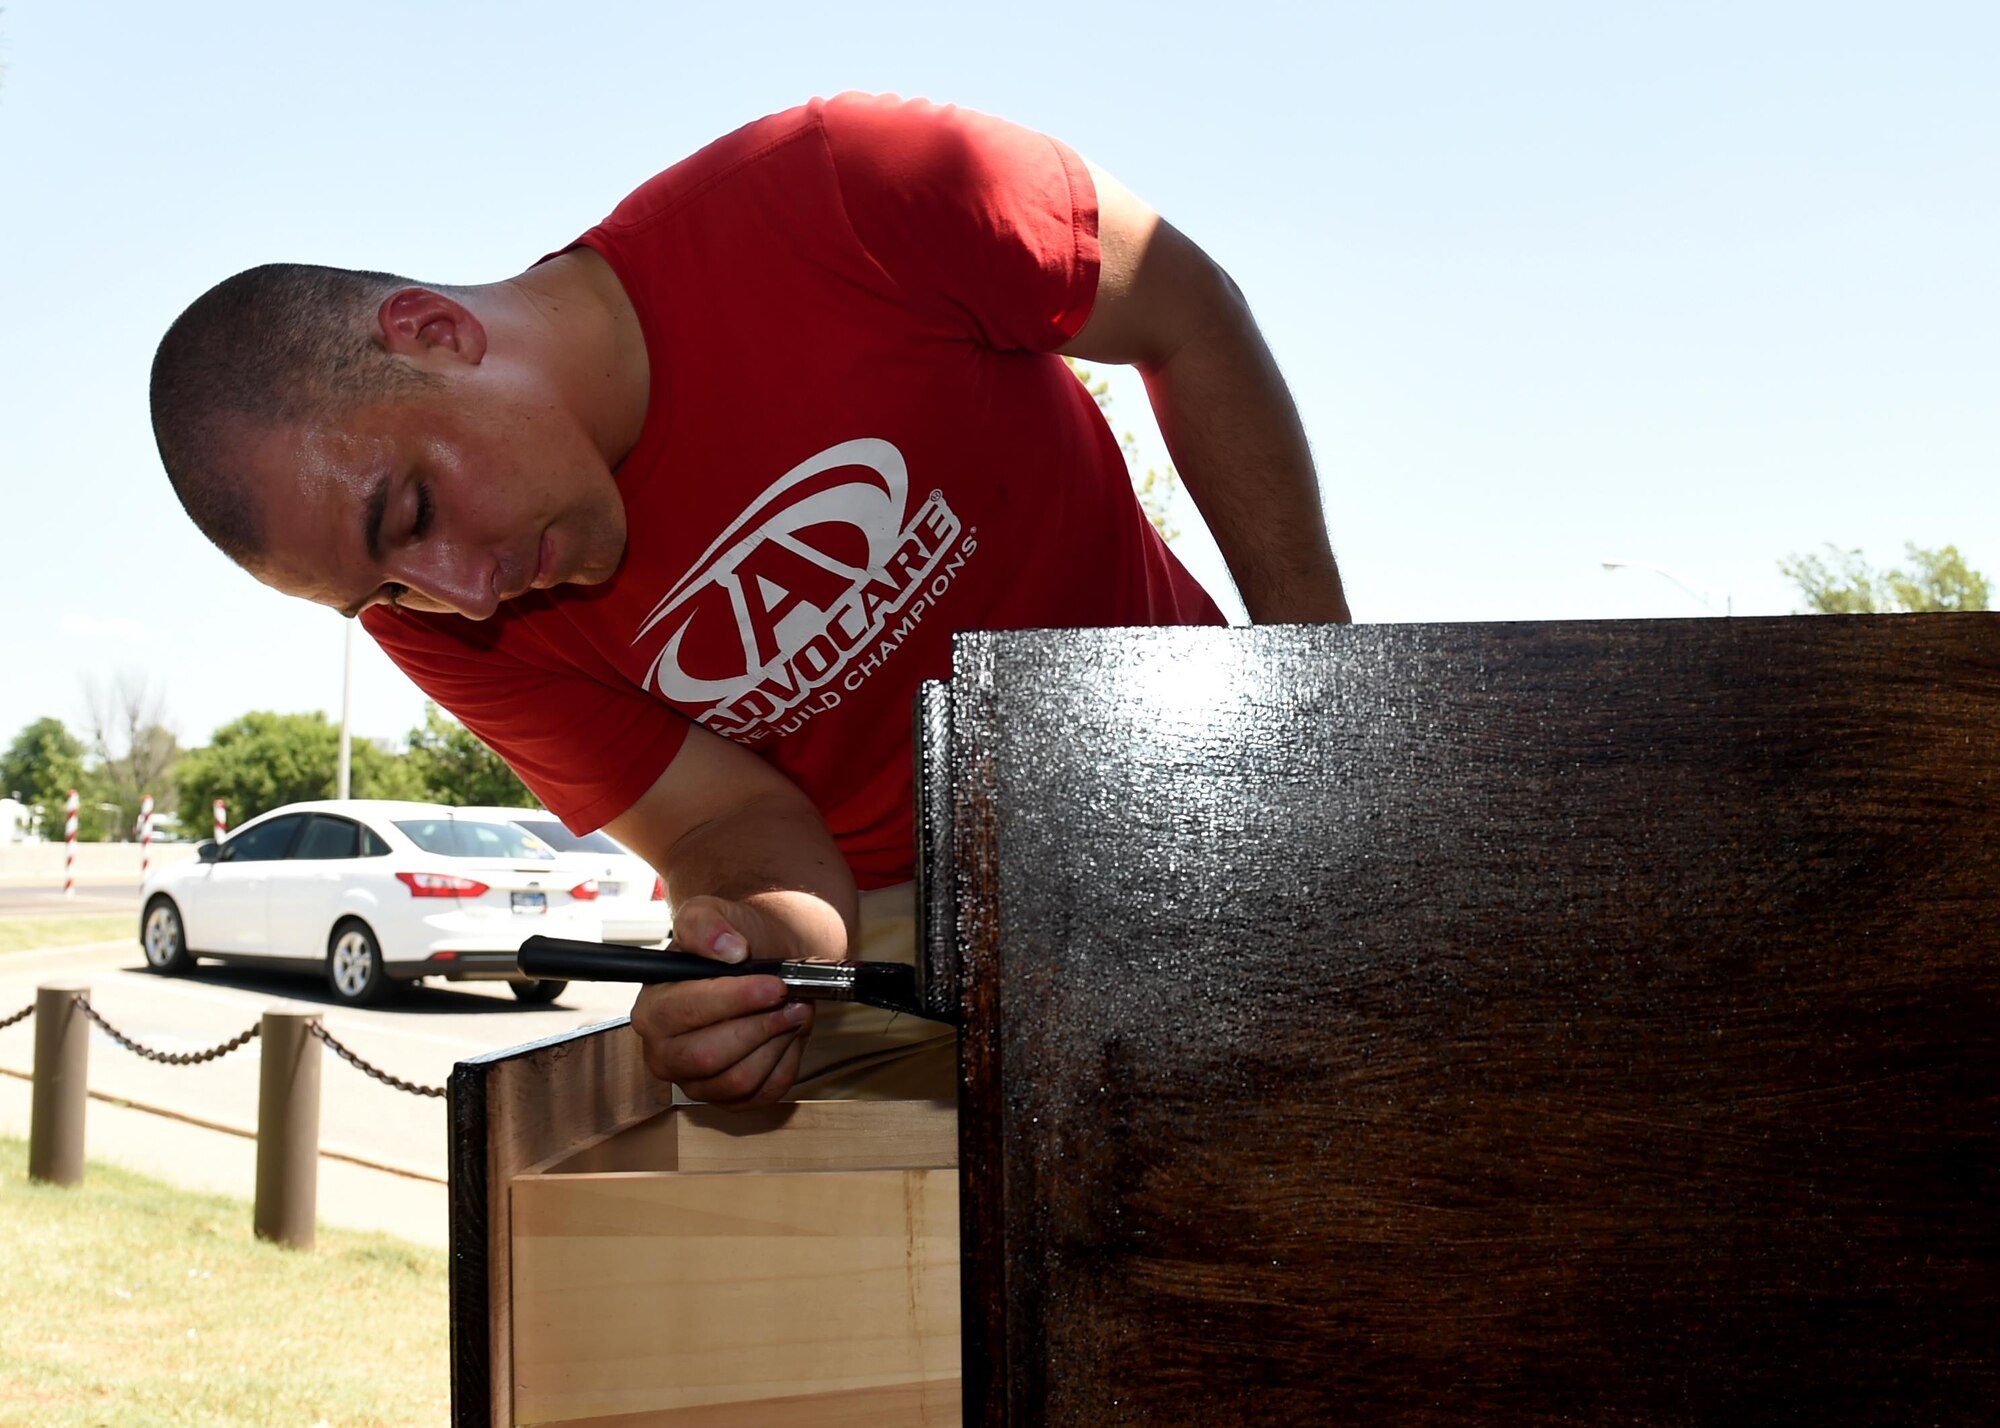 U.S. Air Force Airman 1st Class John Noble, 97th Security Forces Squadron response force member, stains a cabinet August 1, 2016, at Altus Air Force Base, Okla. 97th SFS Airmen, led by U.S. Air Force A1C Jason Martin, 97th SFS response force member, took the initiative to remodel the main gate entry facility to improve efficiency and aesthetics. (U.S. Air Force photo by Airman 1st Class Kirby Turbak/Released) 